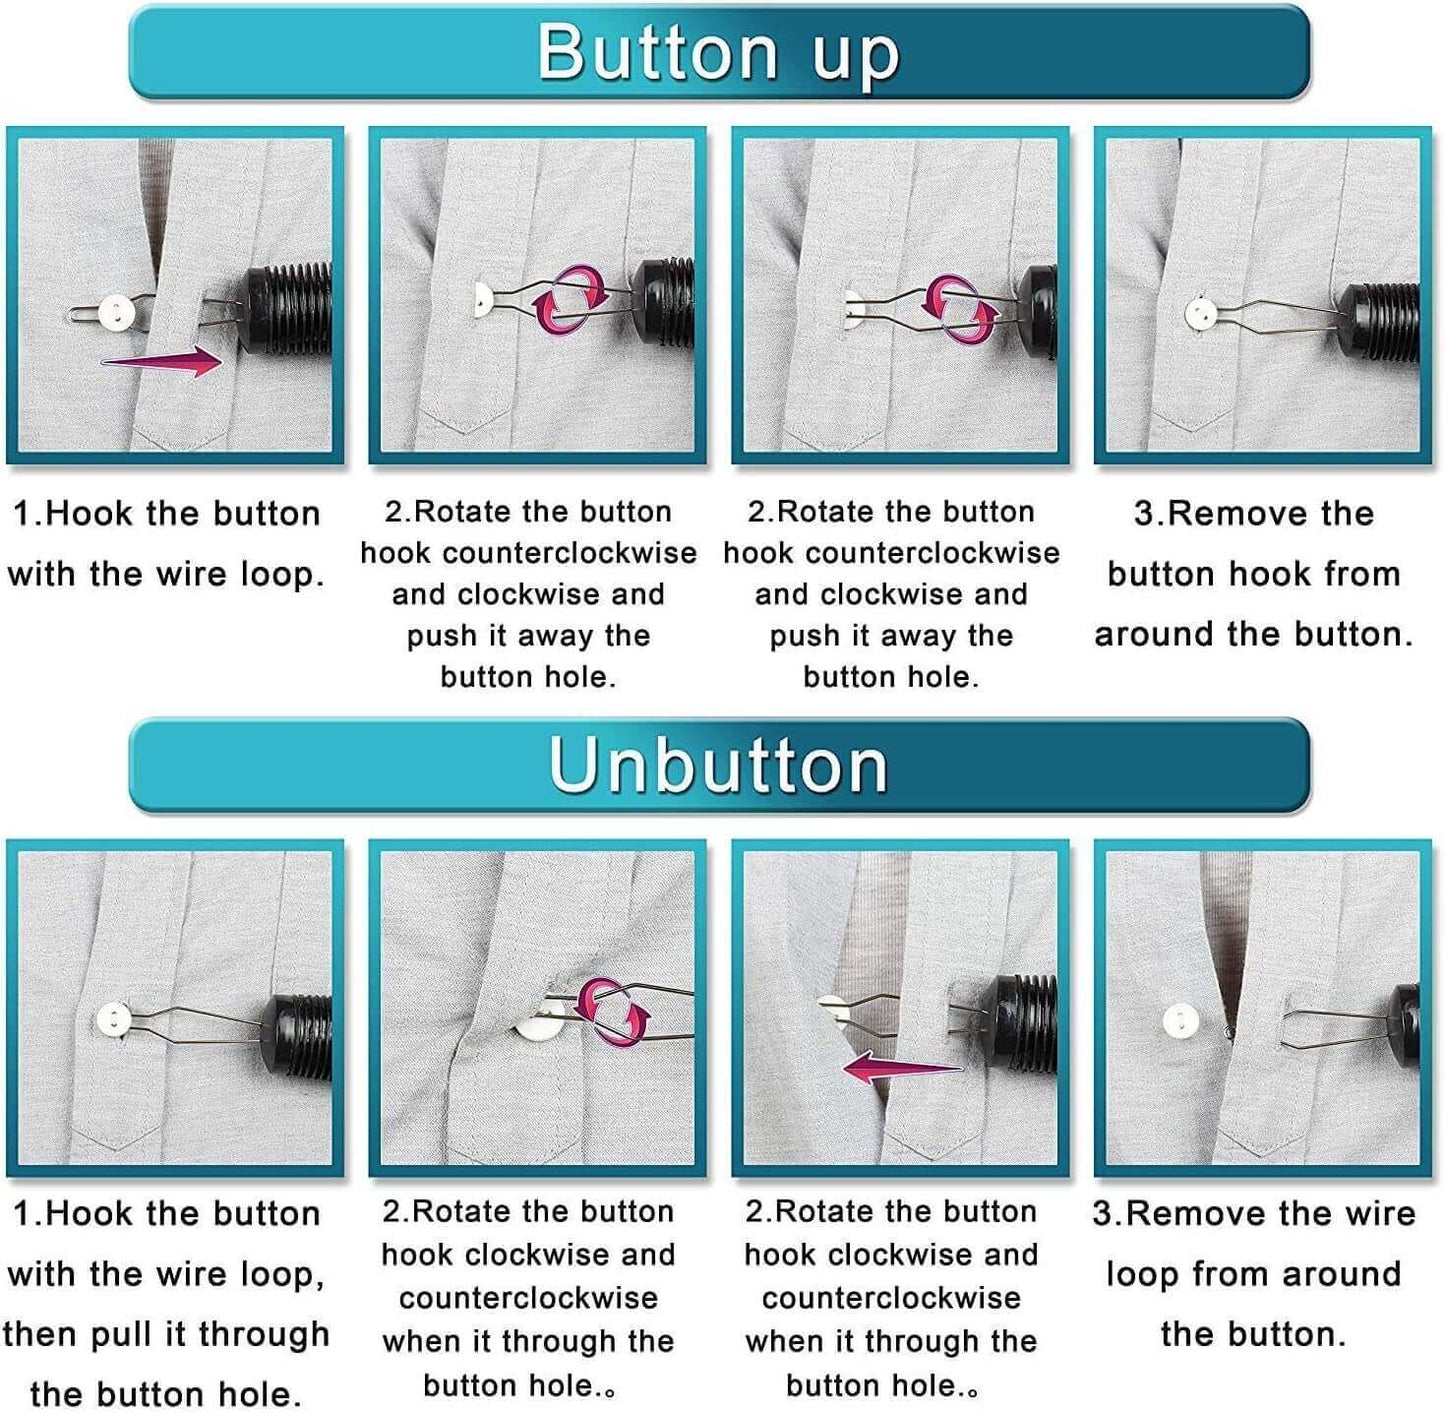 Button Hook with Zipper Pull Button Assist Device with Comfort & Wide Grip,  Shirt & Coat Buttoning Aid for Elderly, Patients